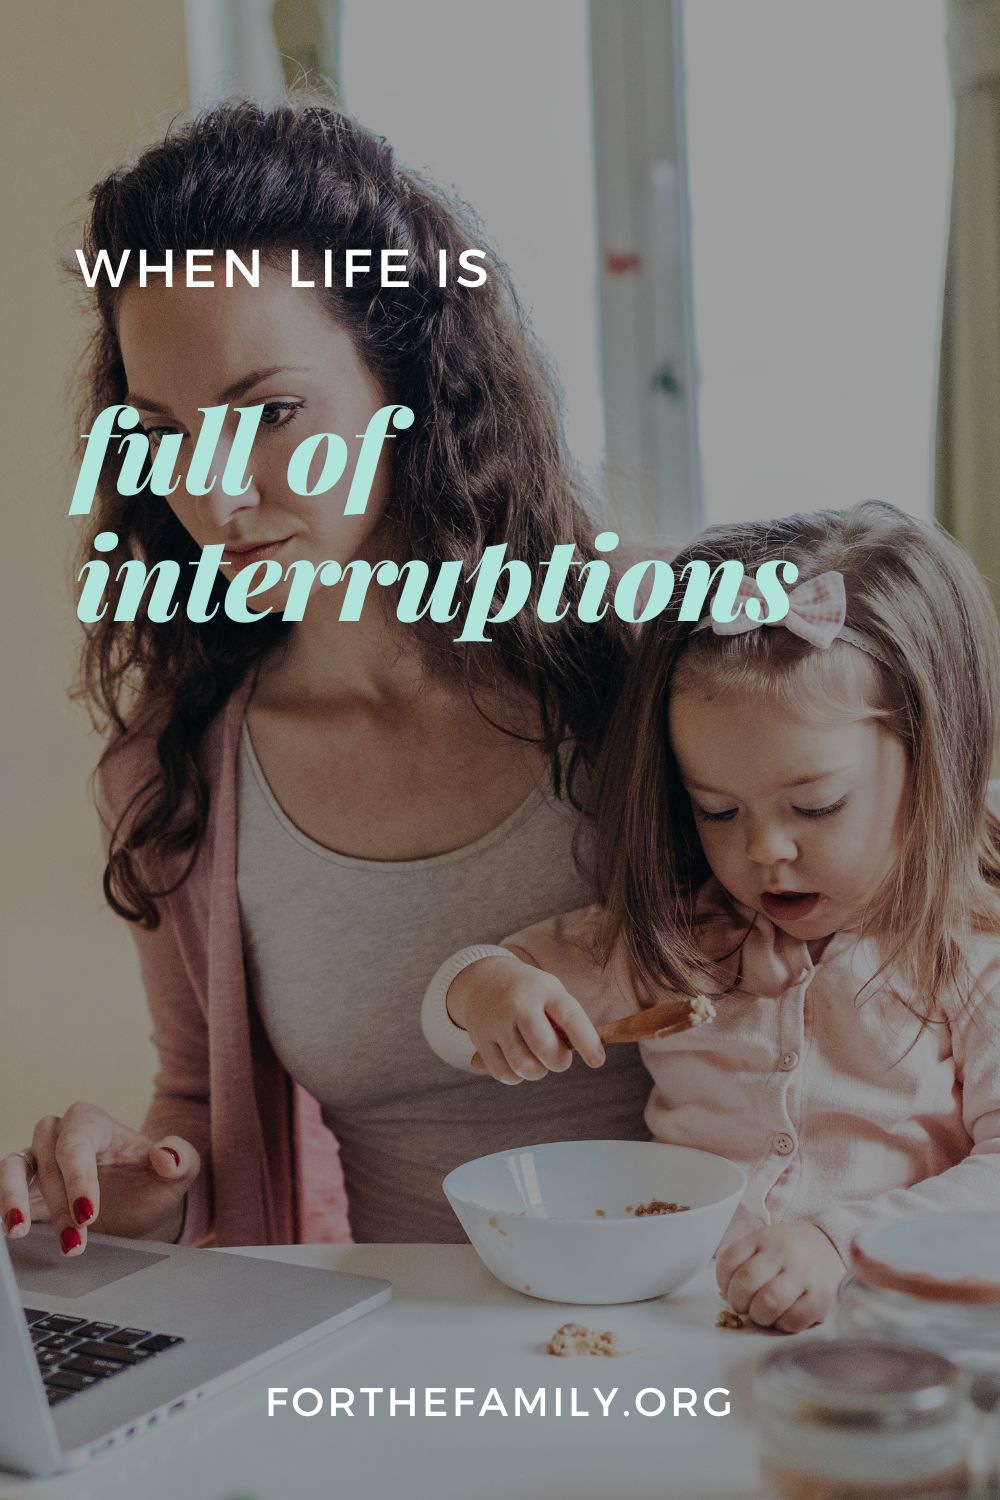 When Life is Full of Interruptions